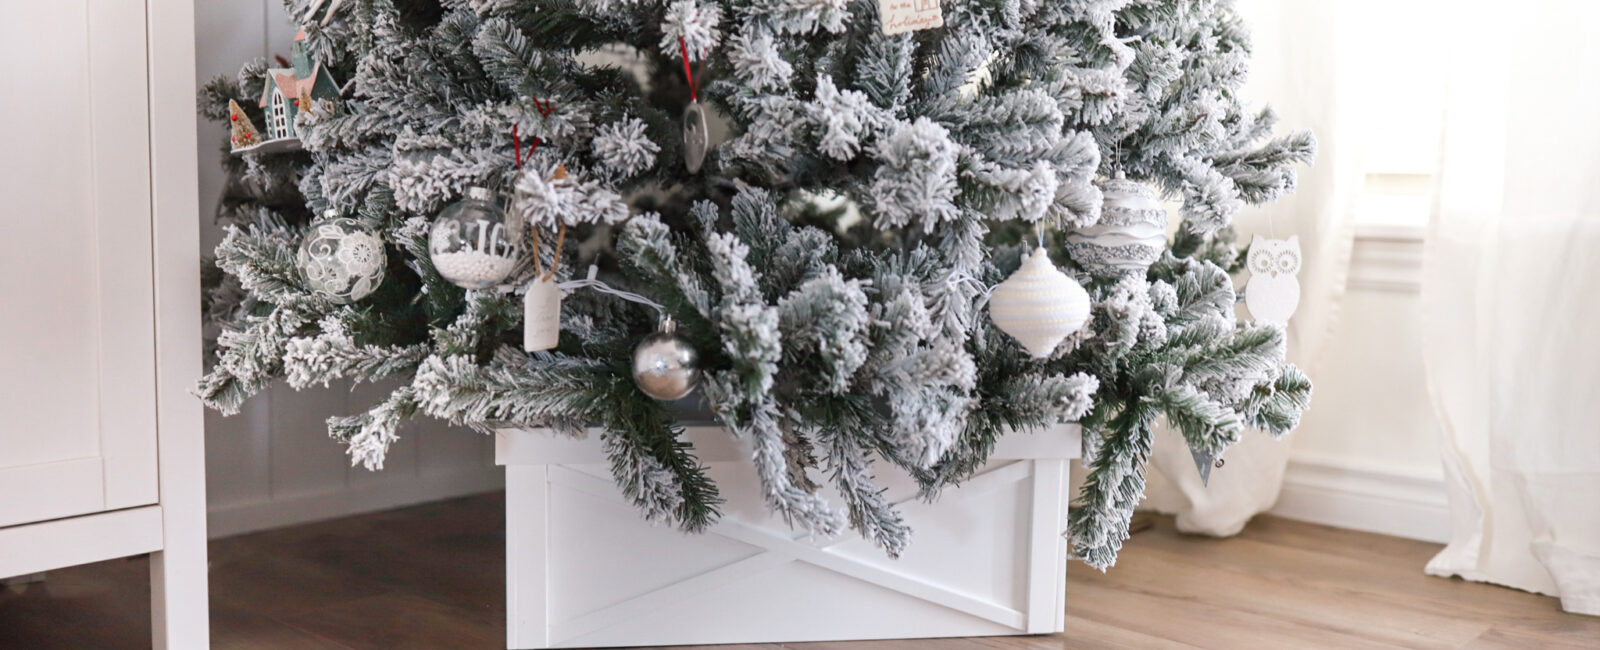 DIY a Christmas Tree Box This Holiday with Home Hardware 